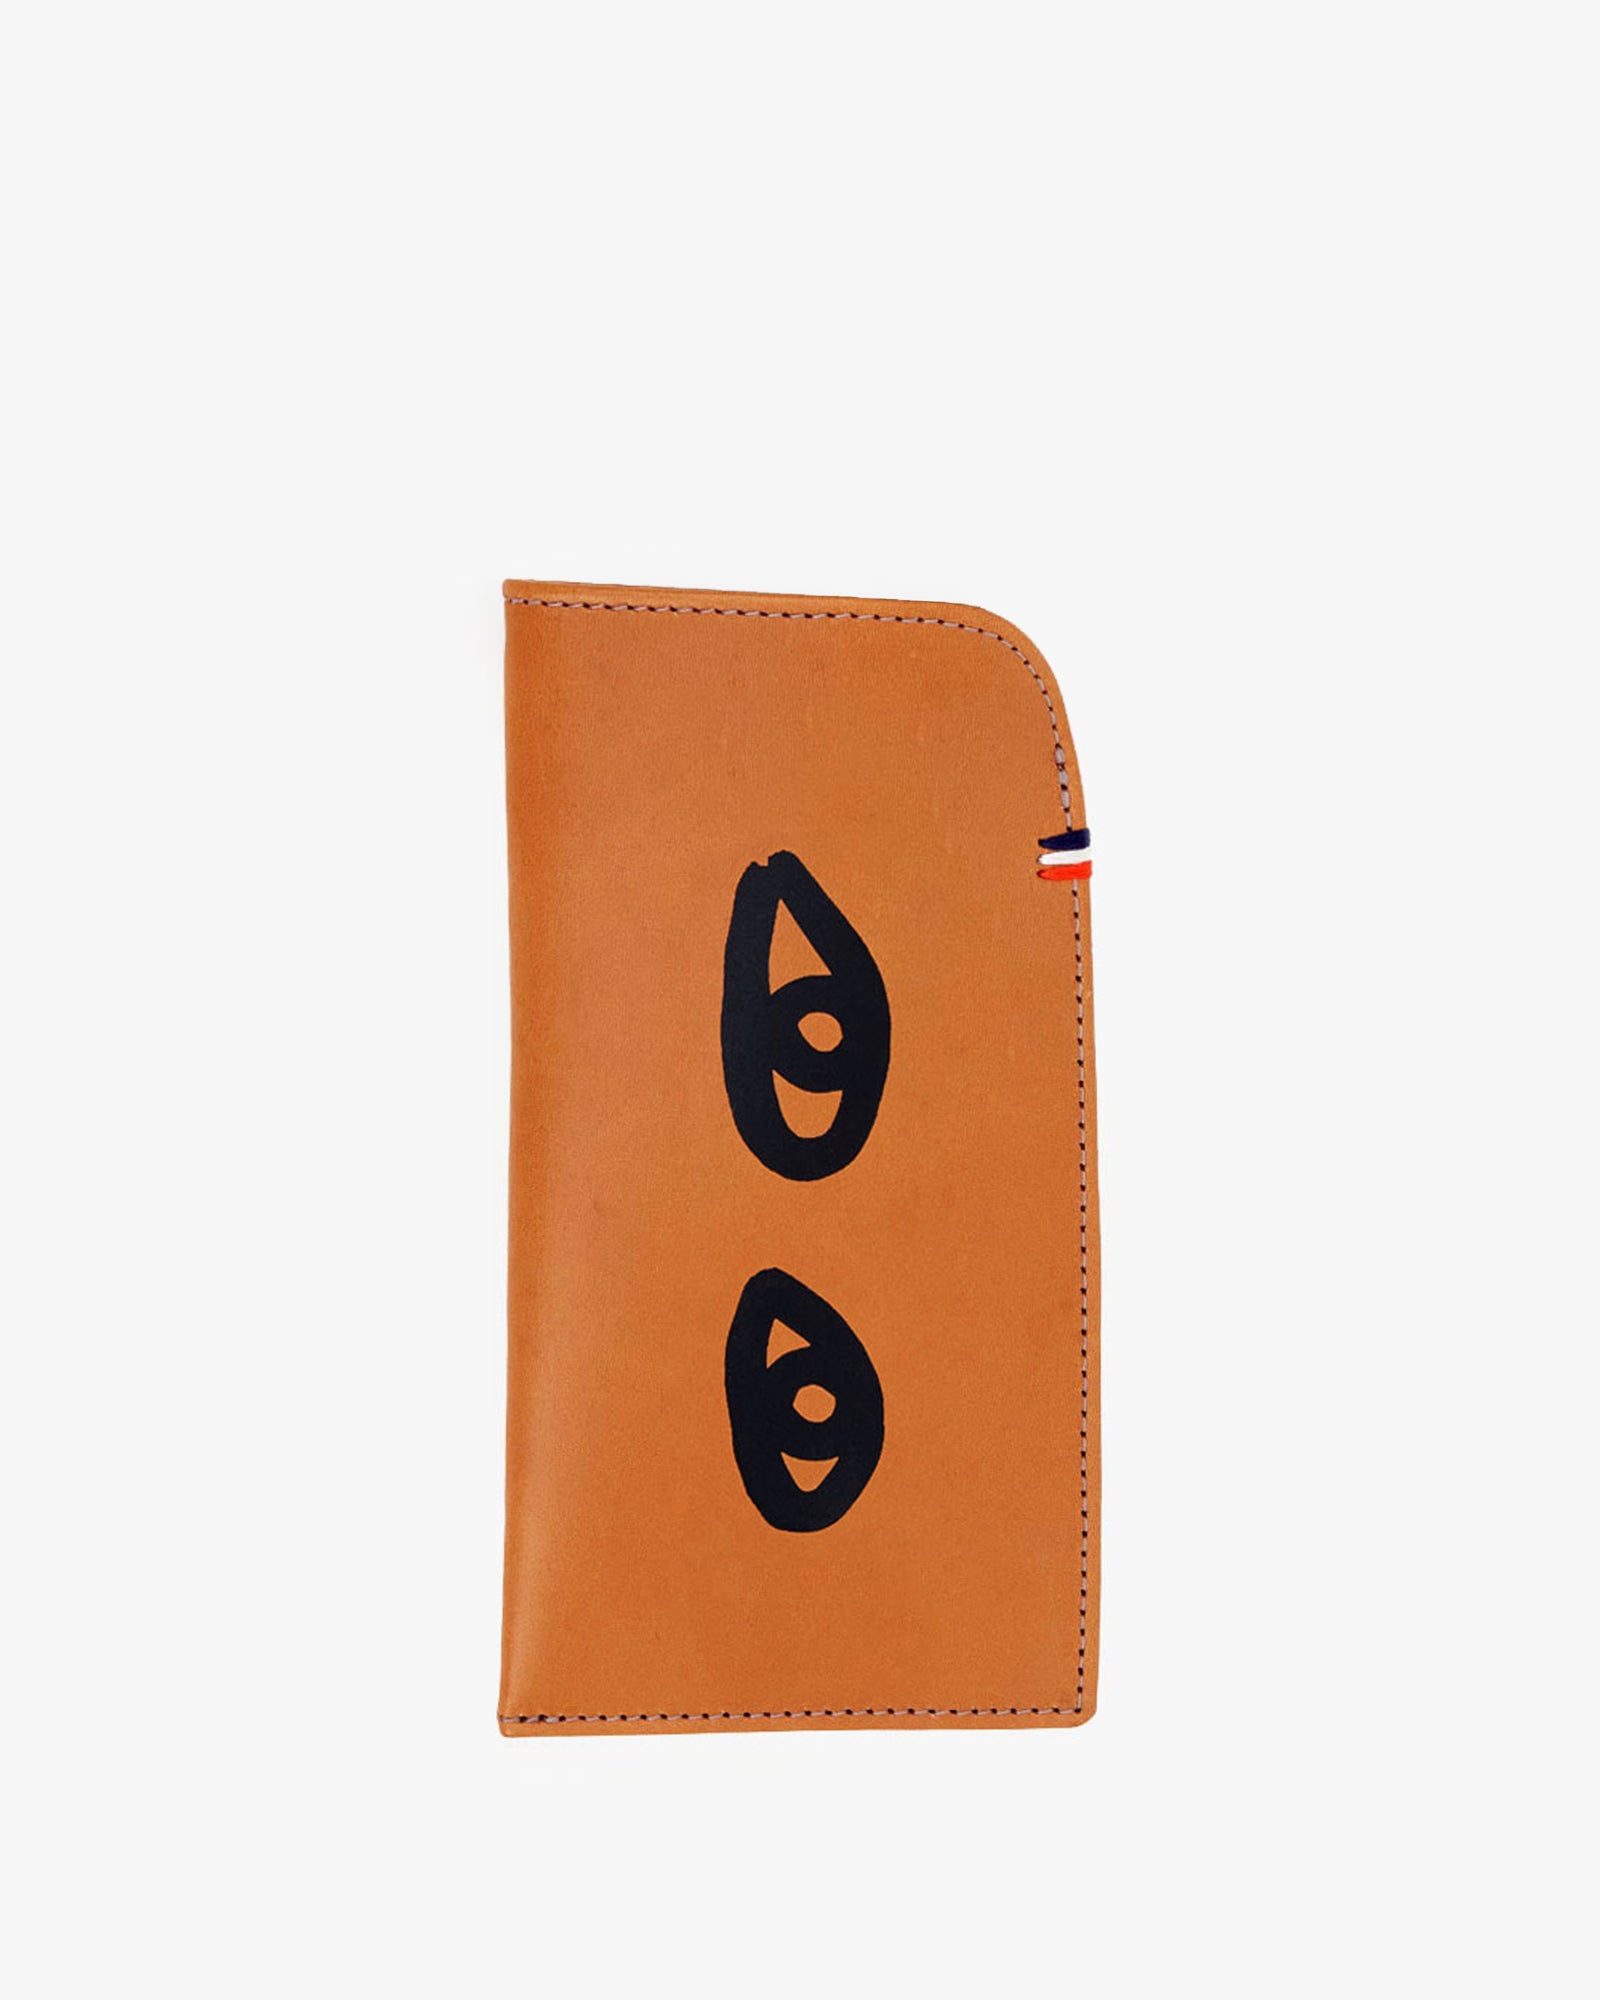 Sunglasses Sleeve in Cuoio with Black Eyes